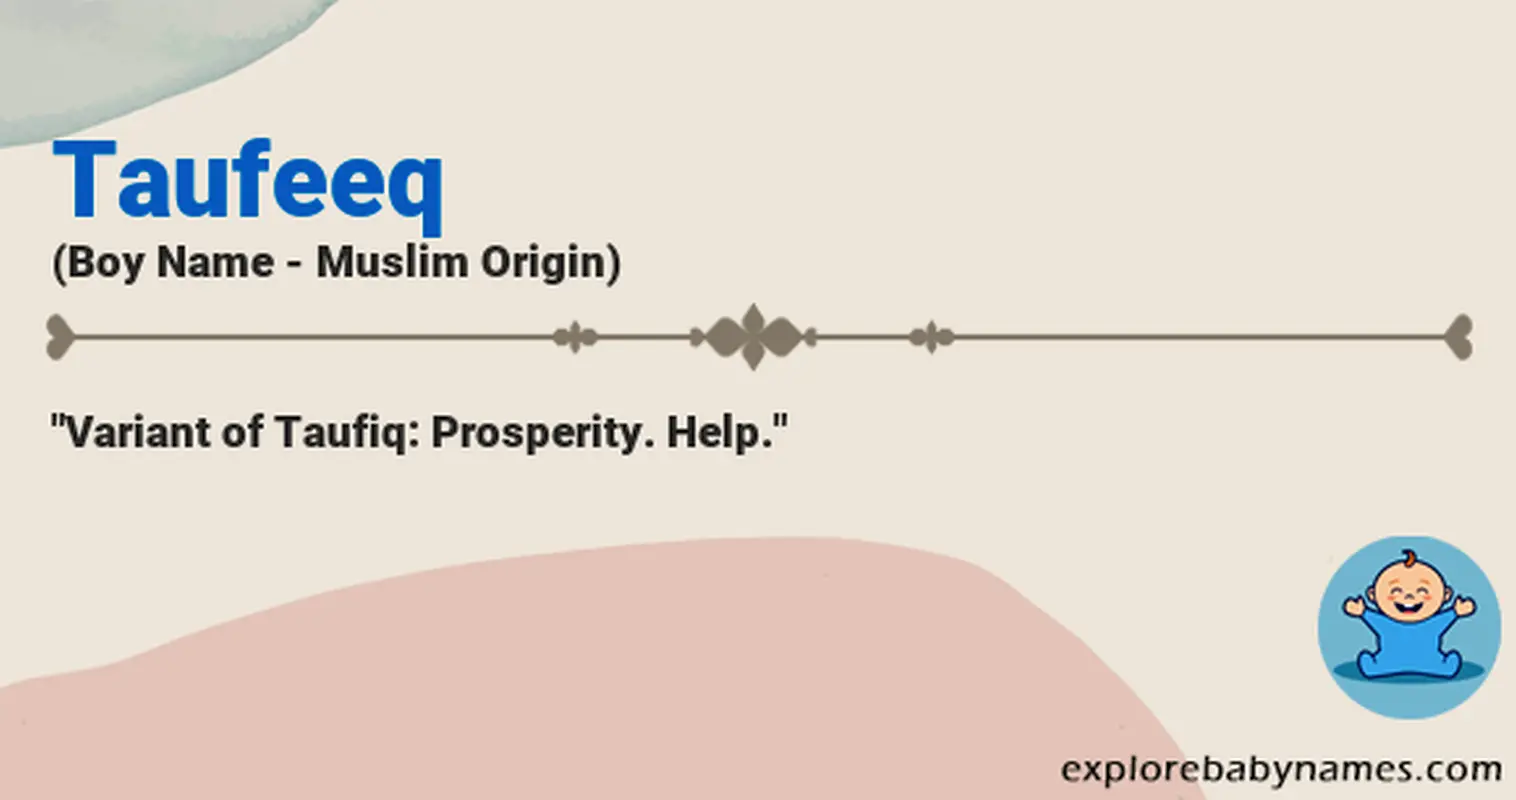 Meaning of Taufeeq